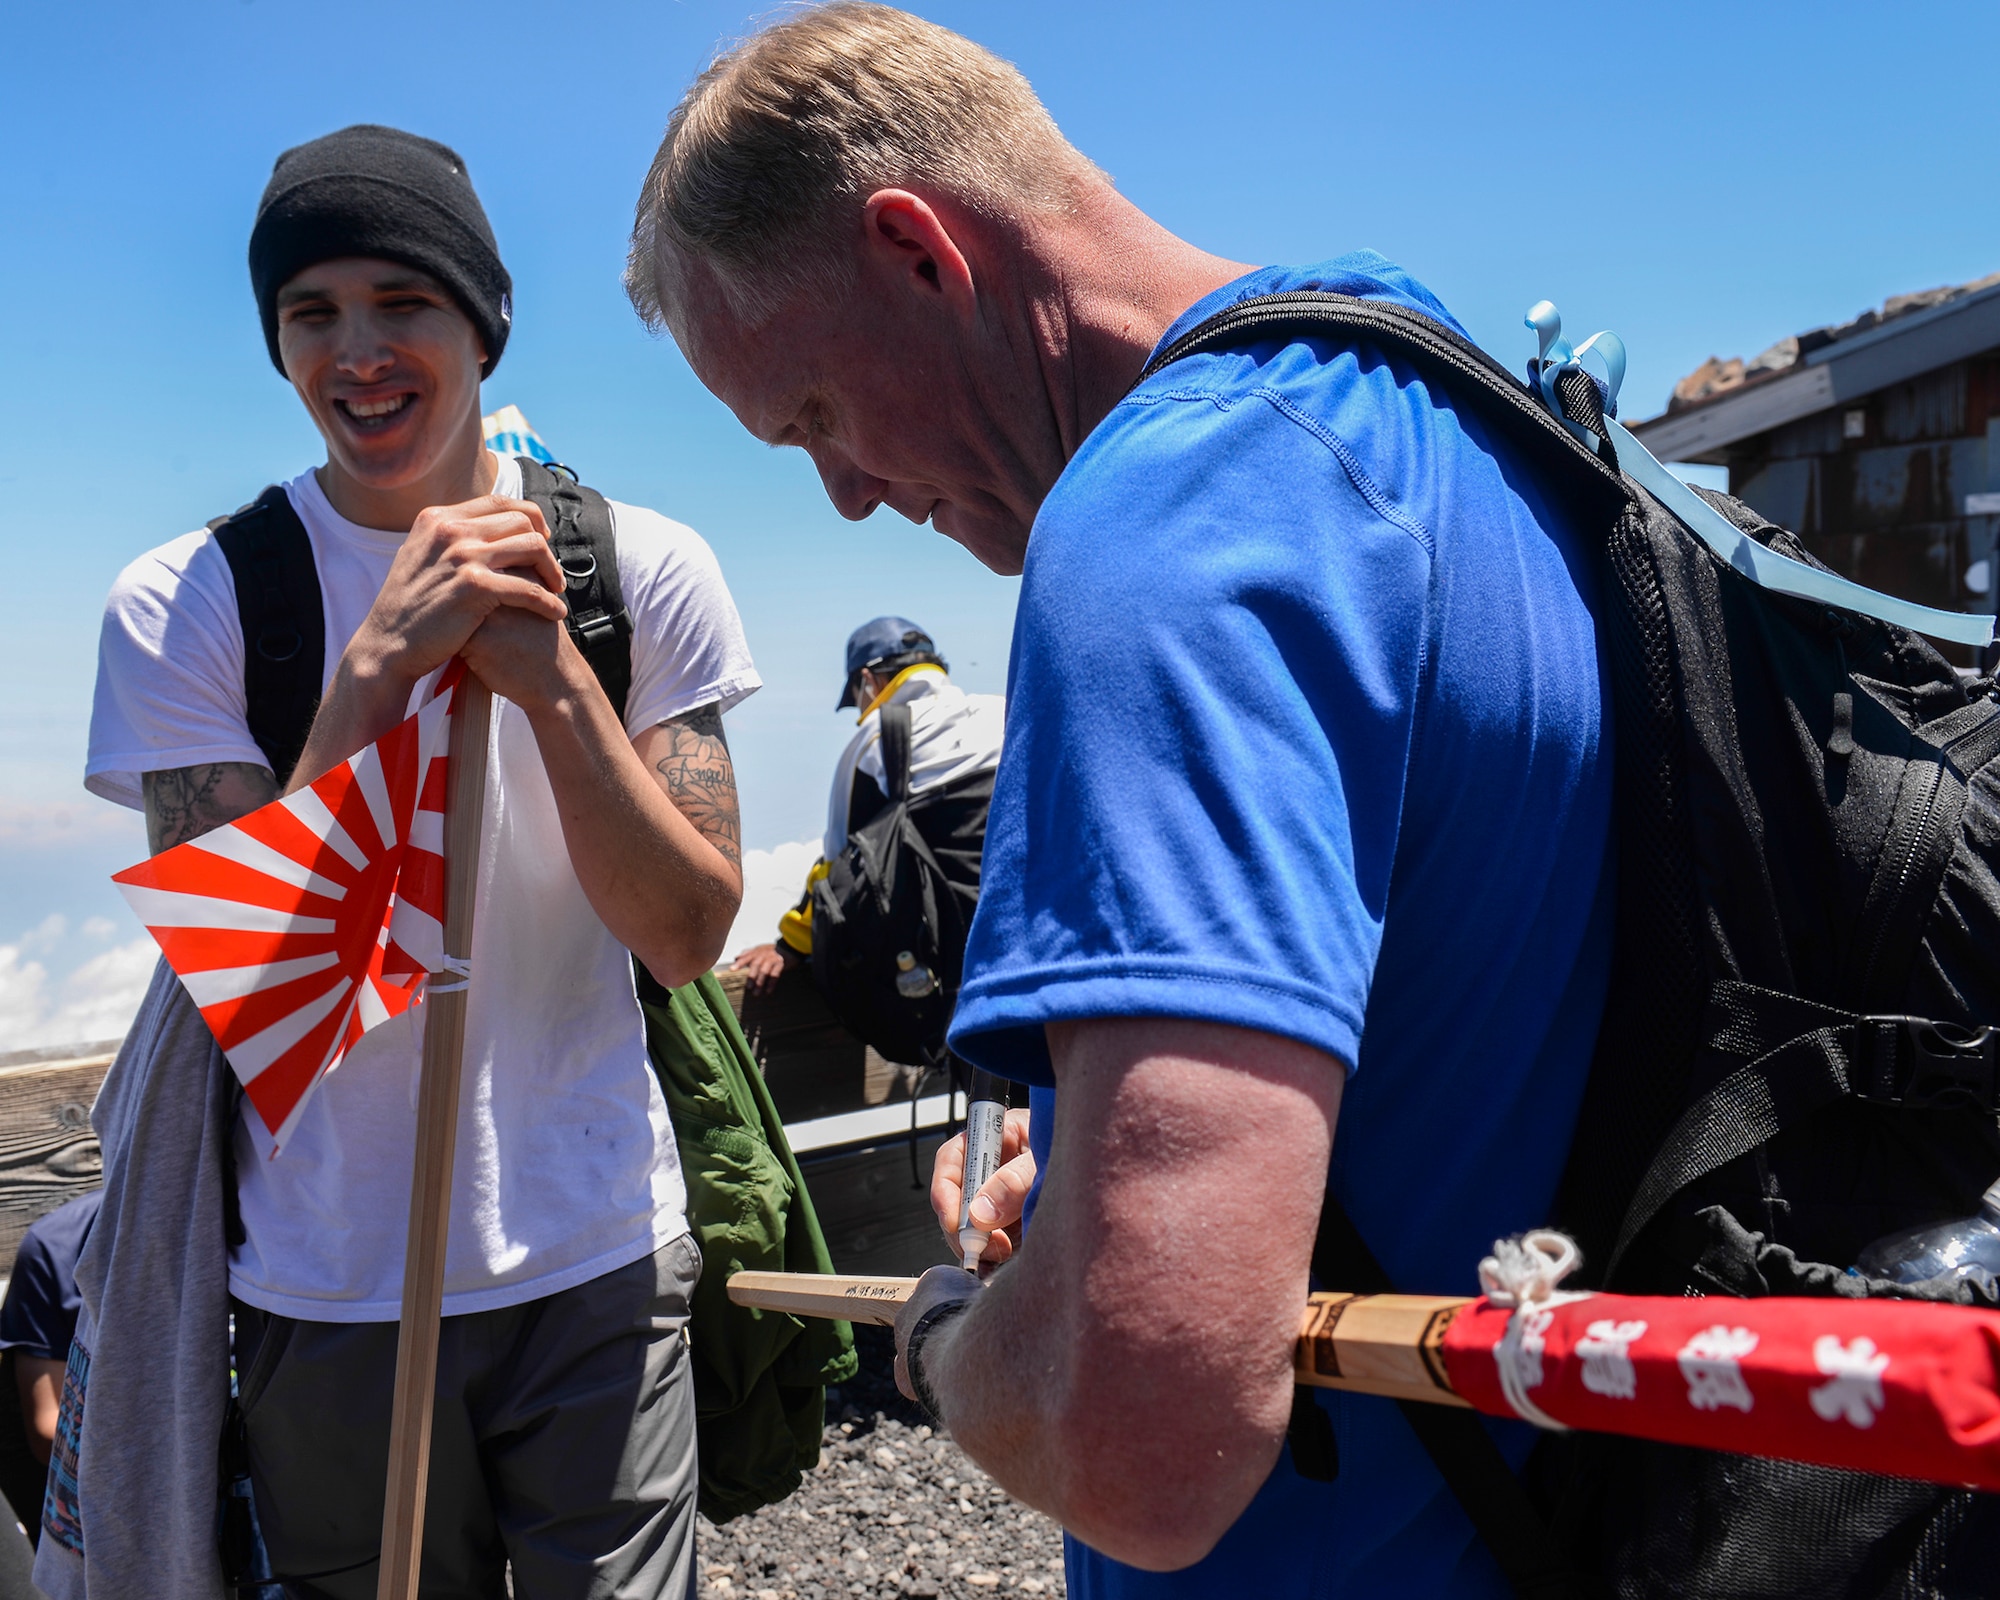 Chief Master Sgt. of the Air Force James A. Cody signs a walking stick for an Airman at the summit of Mount Fuji, Japan, July 11, 2015. During his trip to Japan, Cody extended an opportunity to 85 Yokota Air Base personnel to join him on a resiliency day trip to the summit of Mount Fuji. (U.S. Air Force photo/Airman 1st Class Elizabeth Baker)